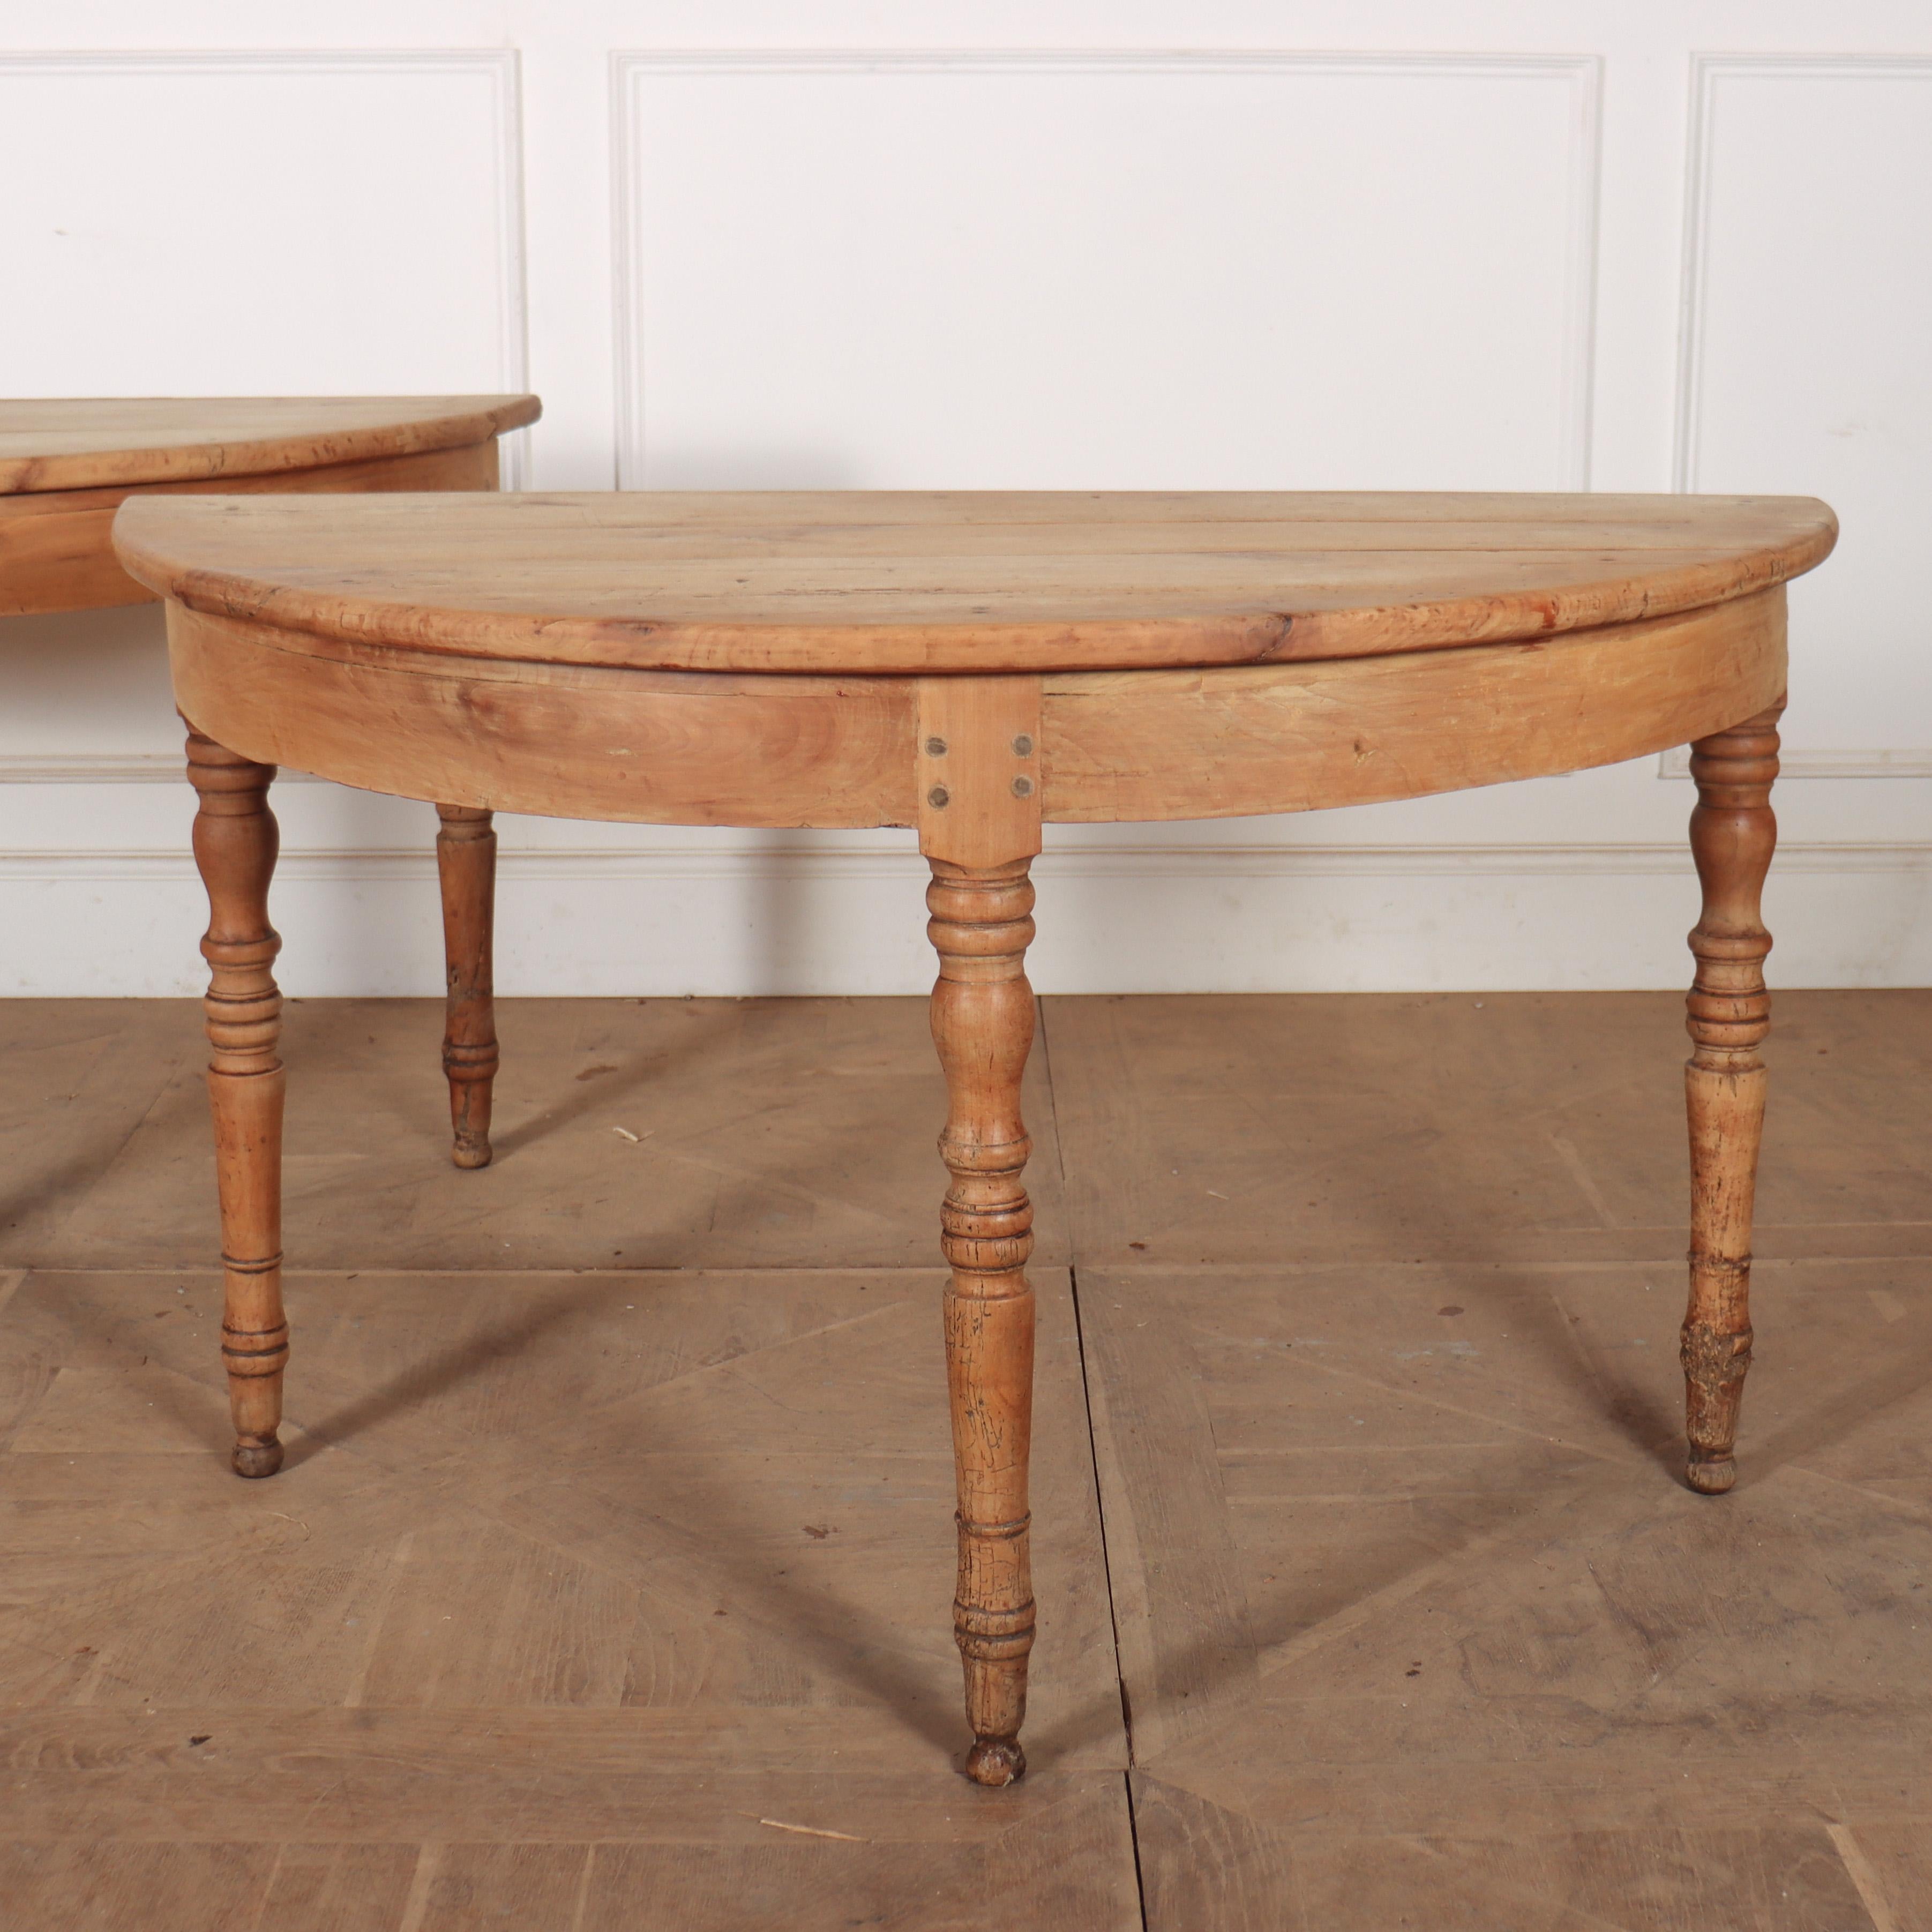 Good pair of 19th C French fruitwood demi-lune console tables. 1860.

Reference: 8269

Dimensions
48 inches (122 cms) Wide
22 inches (56 cms) Deep
28.5 inches (72 cms) High